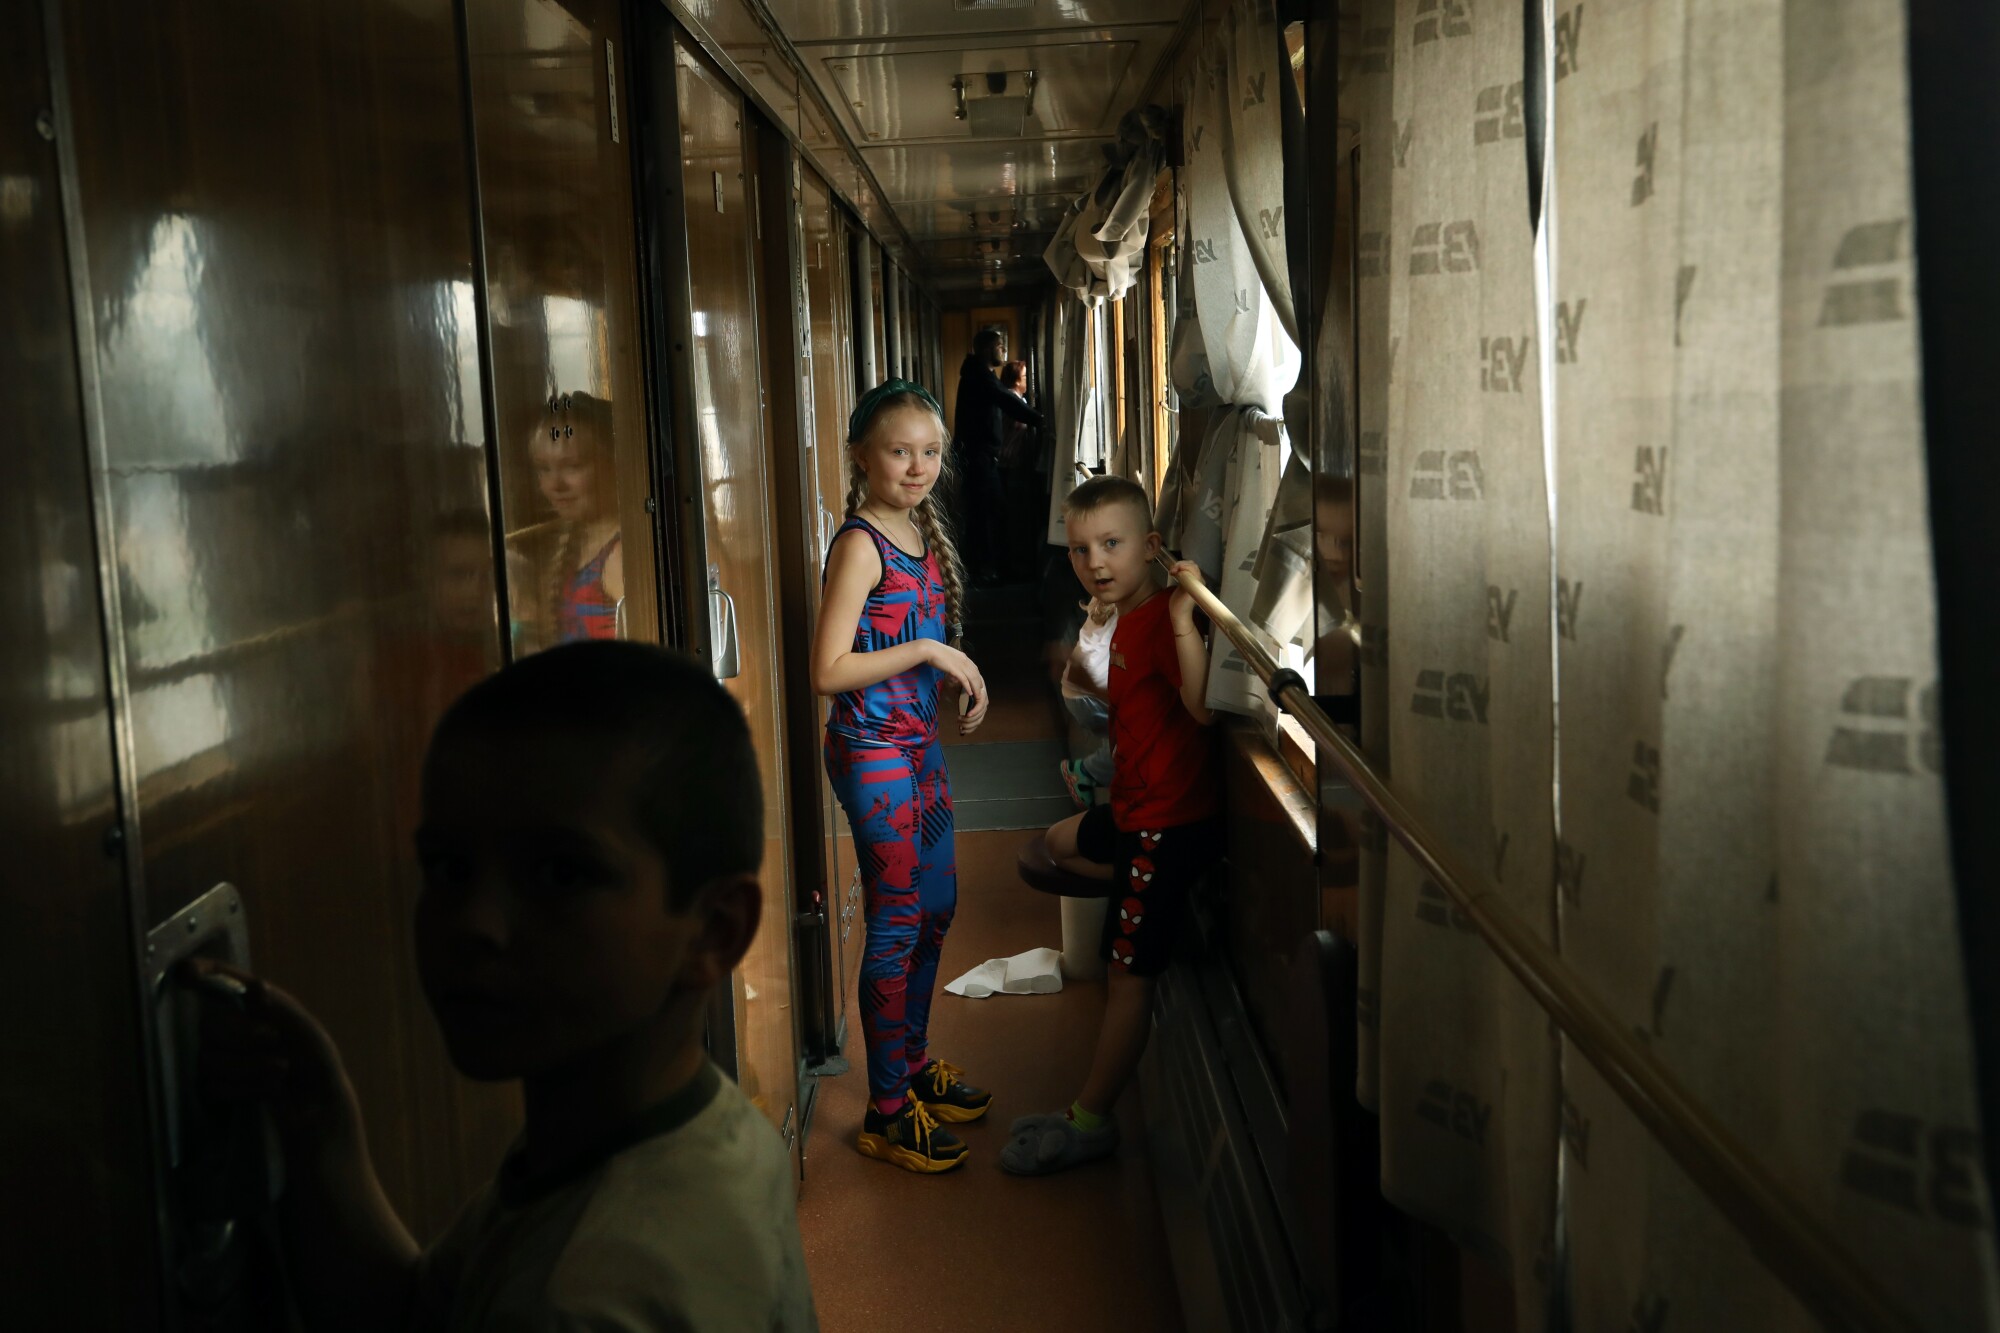 A girl and a boy stand in the train corridor while, in the foreground, a boy holds onto a door handle 